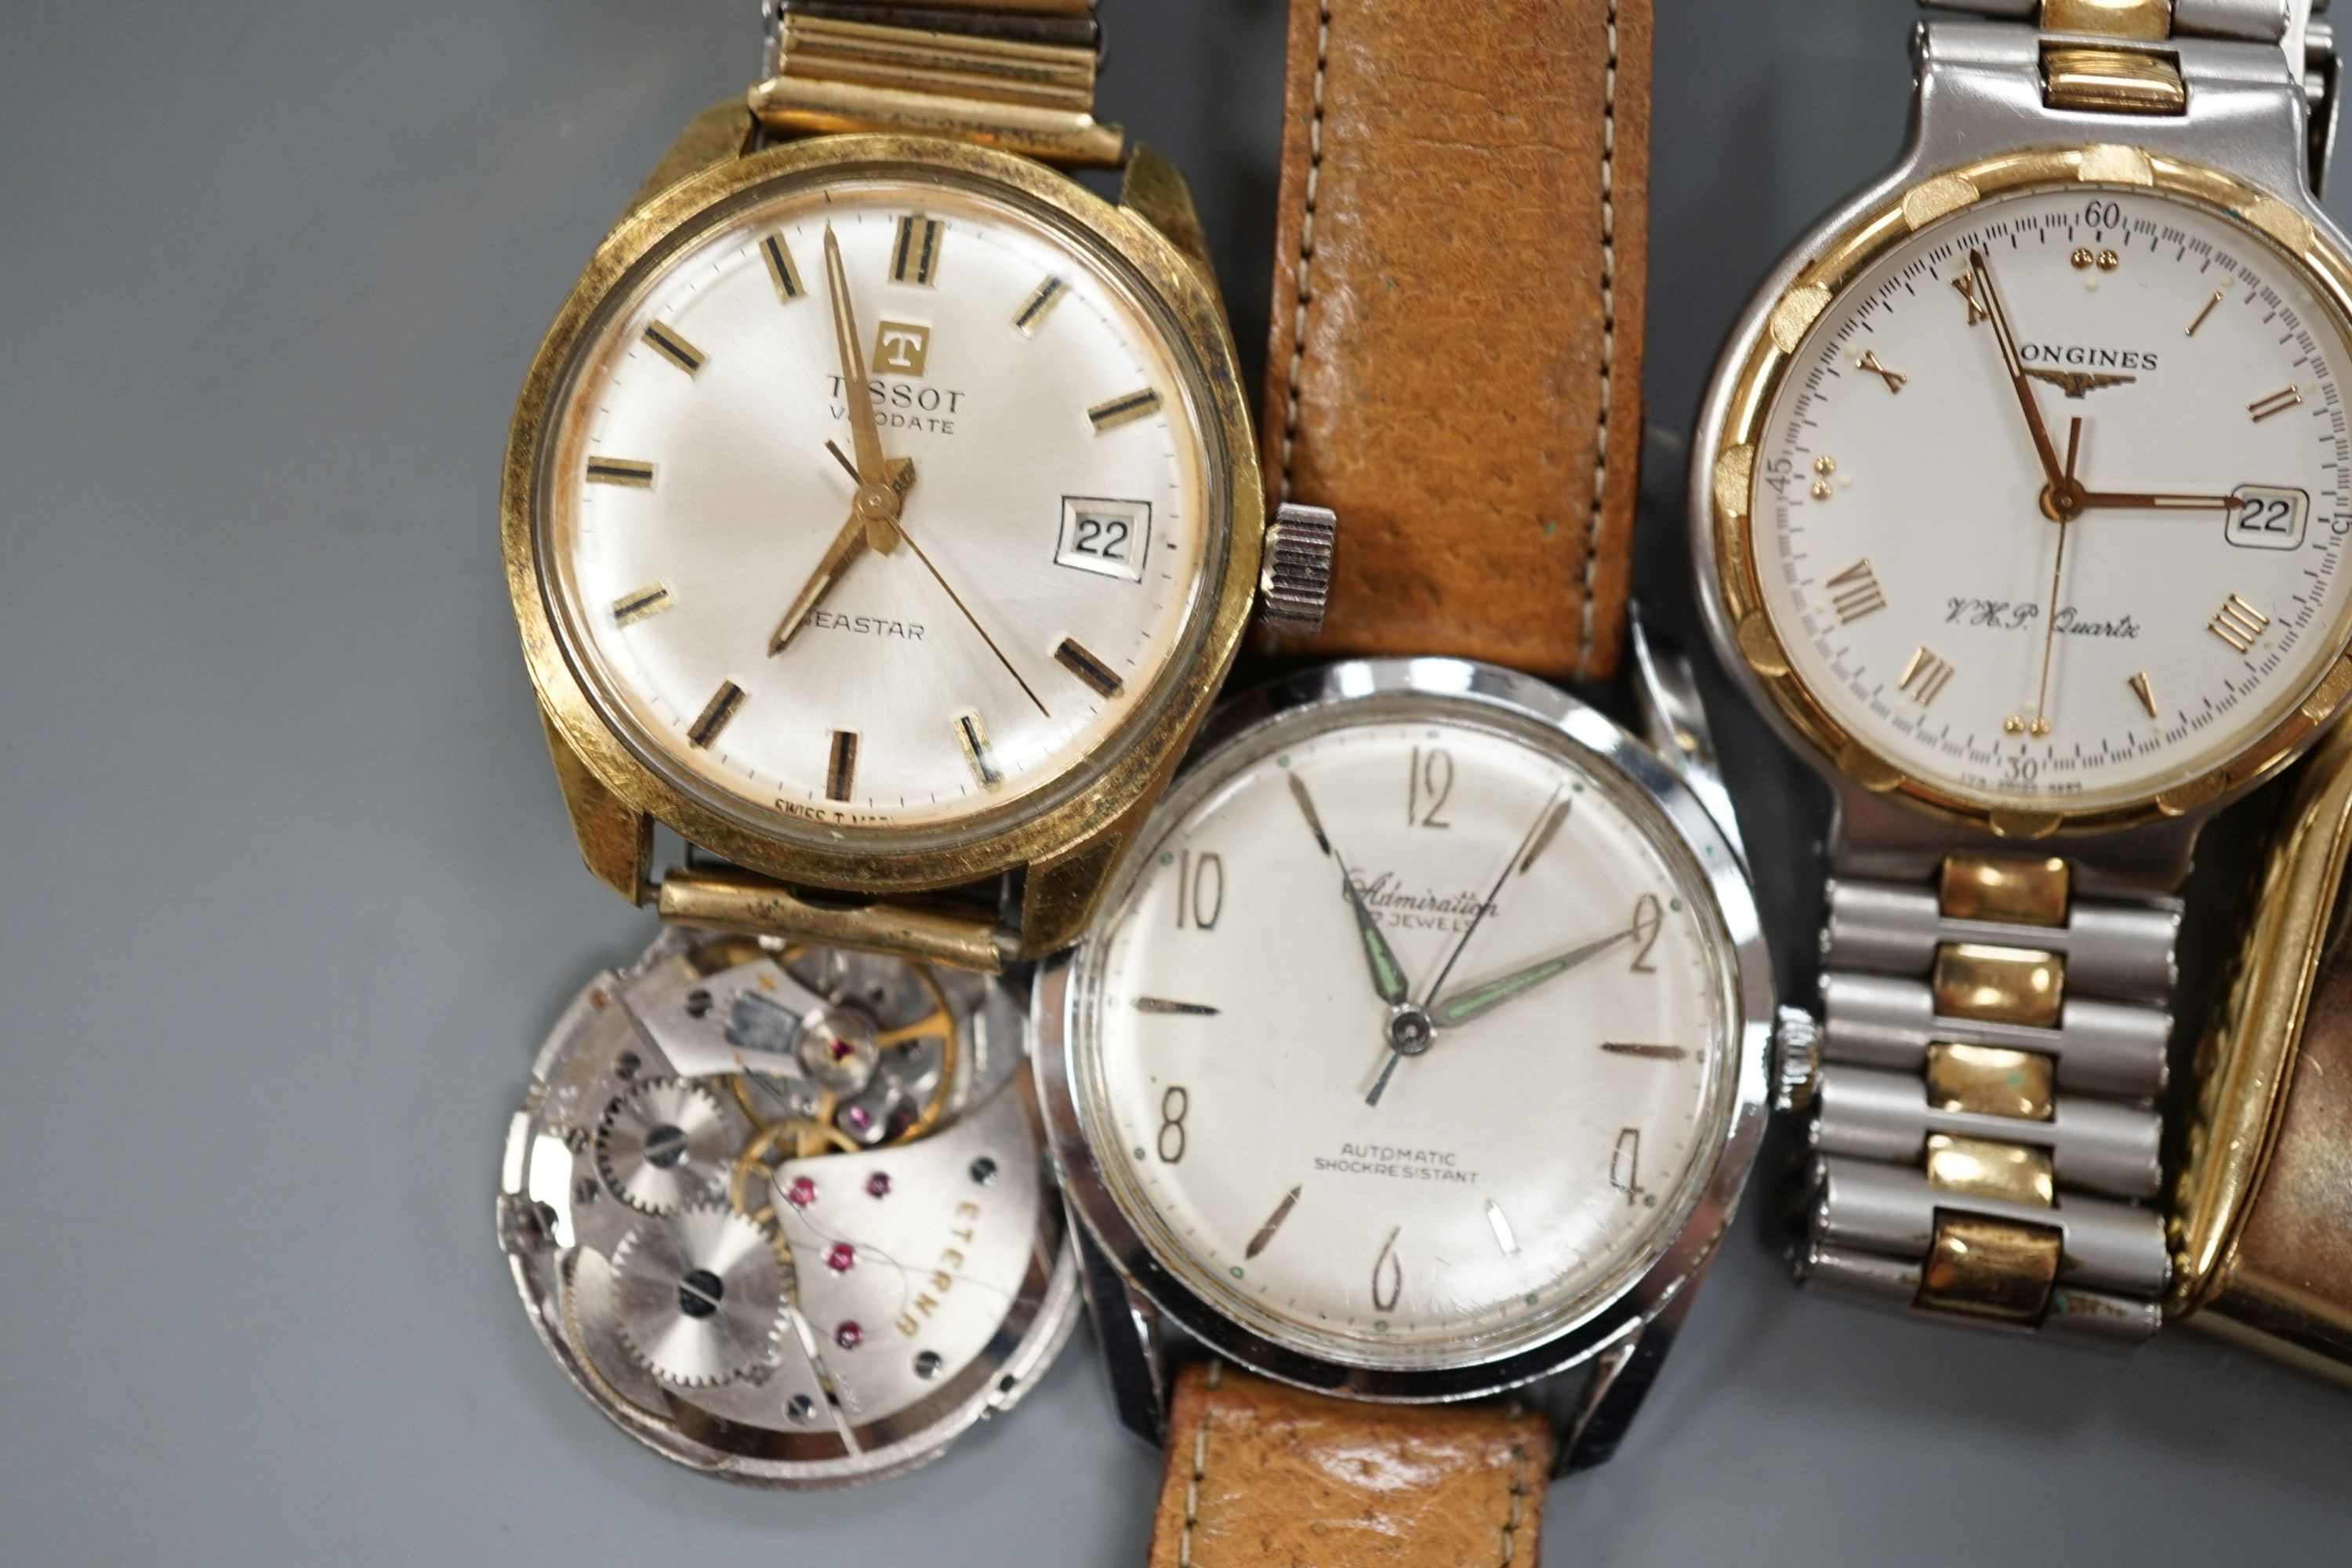 Three gentleman's wrist watches, Tissot, Longines VHP quartz and Admiration, an Eterna movement and a Jaeger LeCoultre travelling watch.